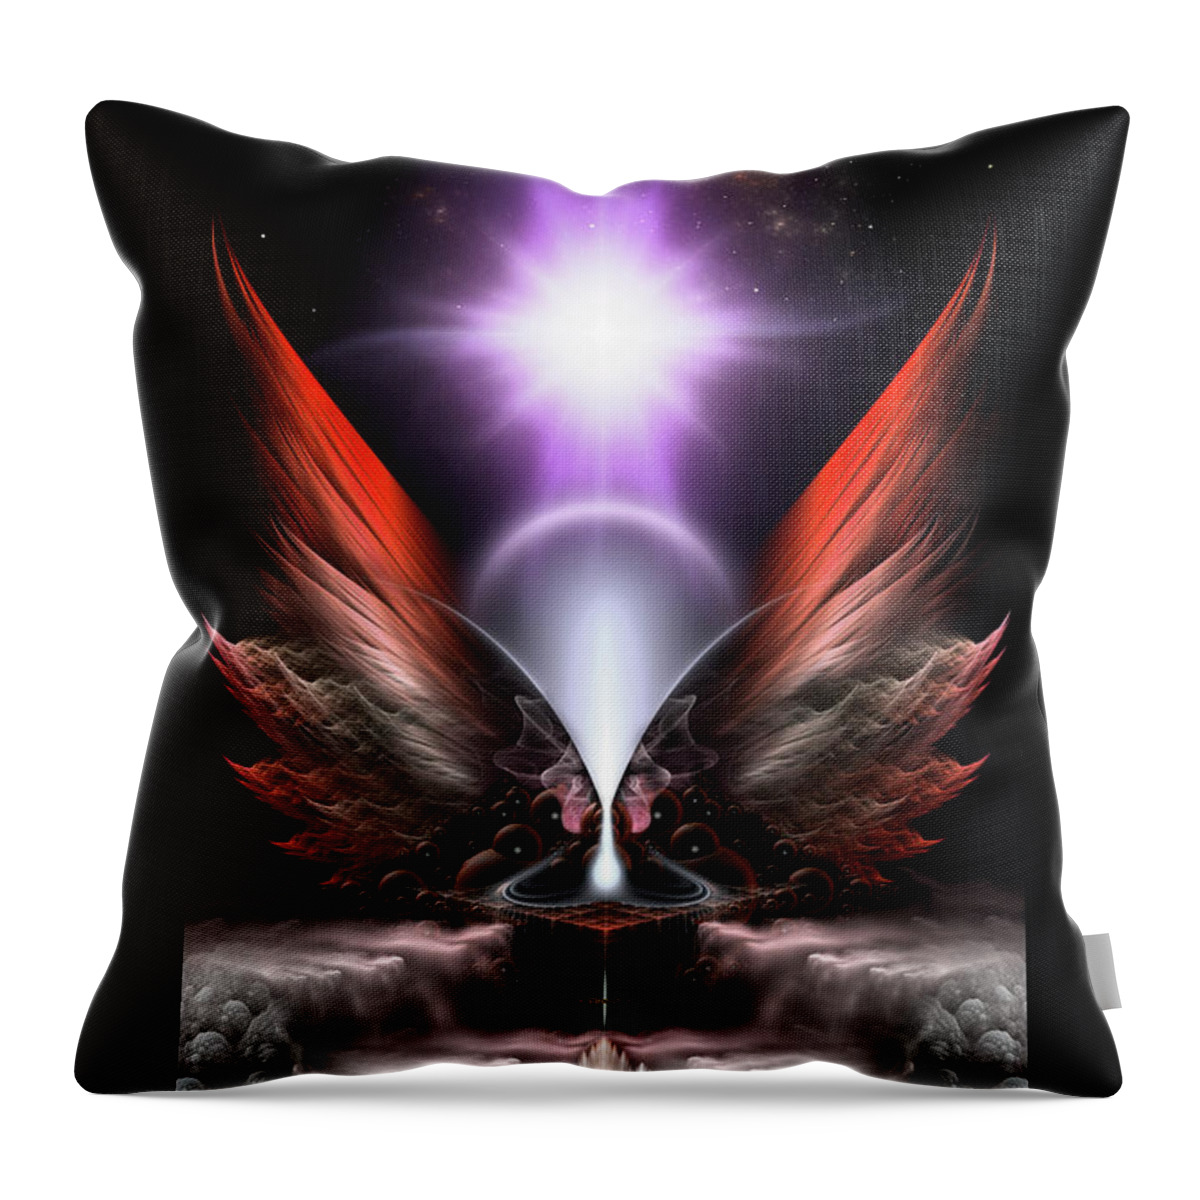 Wings Of Anthropils Throw Pillow featuring the digital art Wings Of Anthropolis HC Fractal Composition by Rolando Burbon